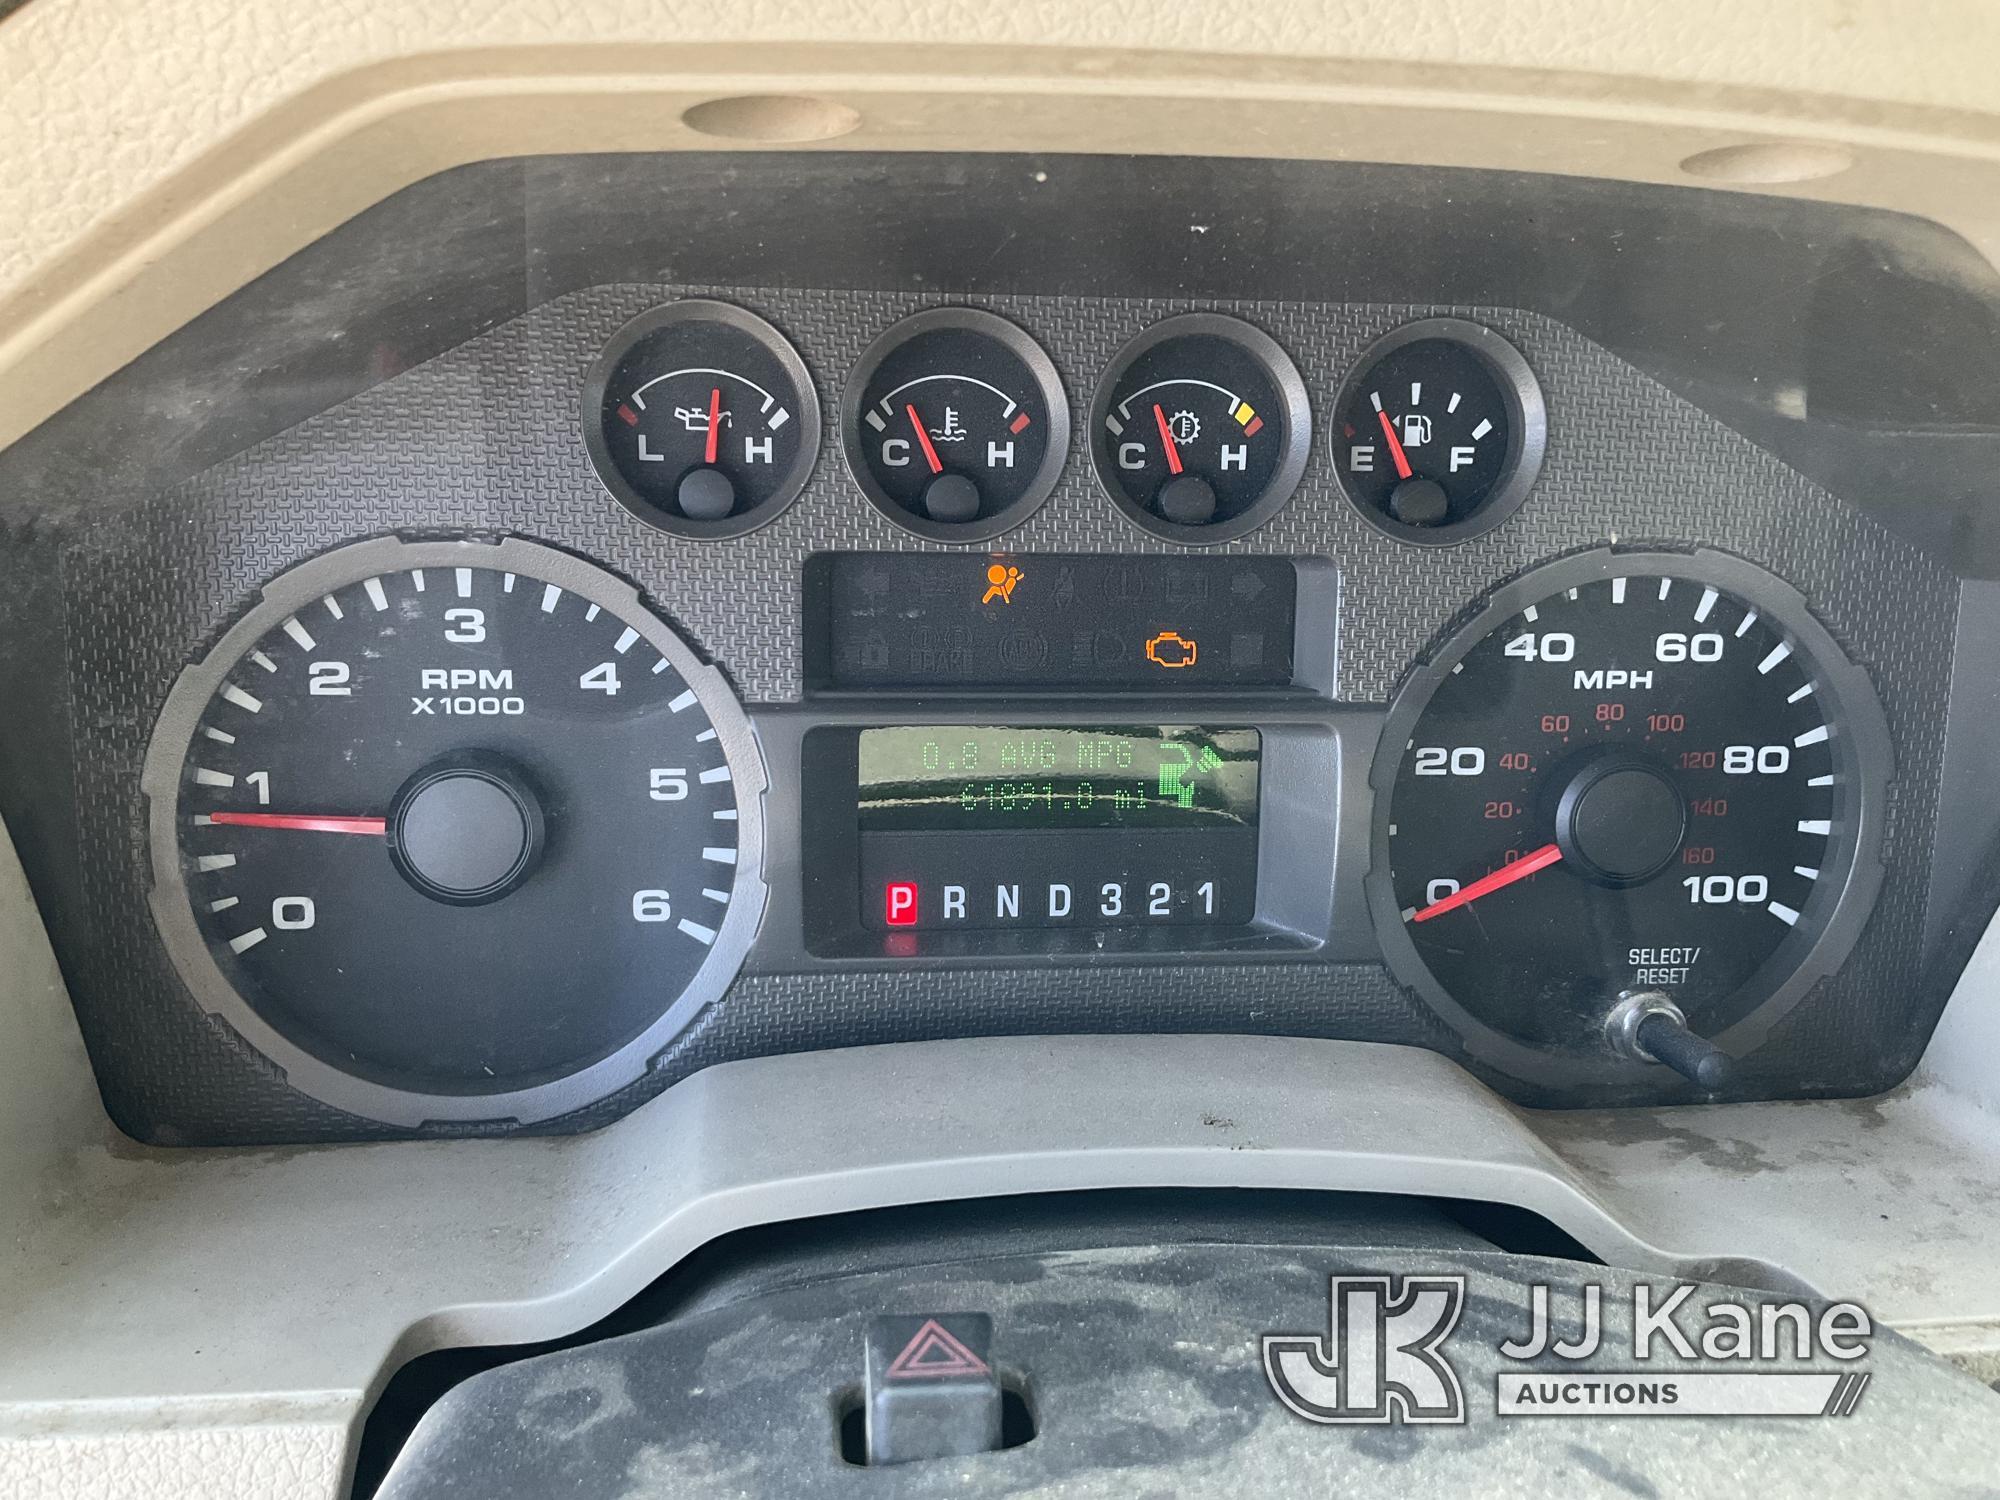 (Dixon, CA) 2008 Ford F350 Extended-Cab Pickup Truck Runs & Moves, Has Check Engine Light